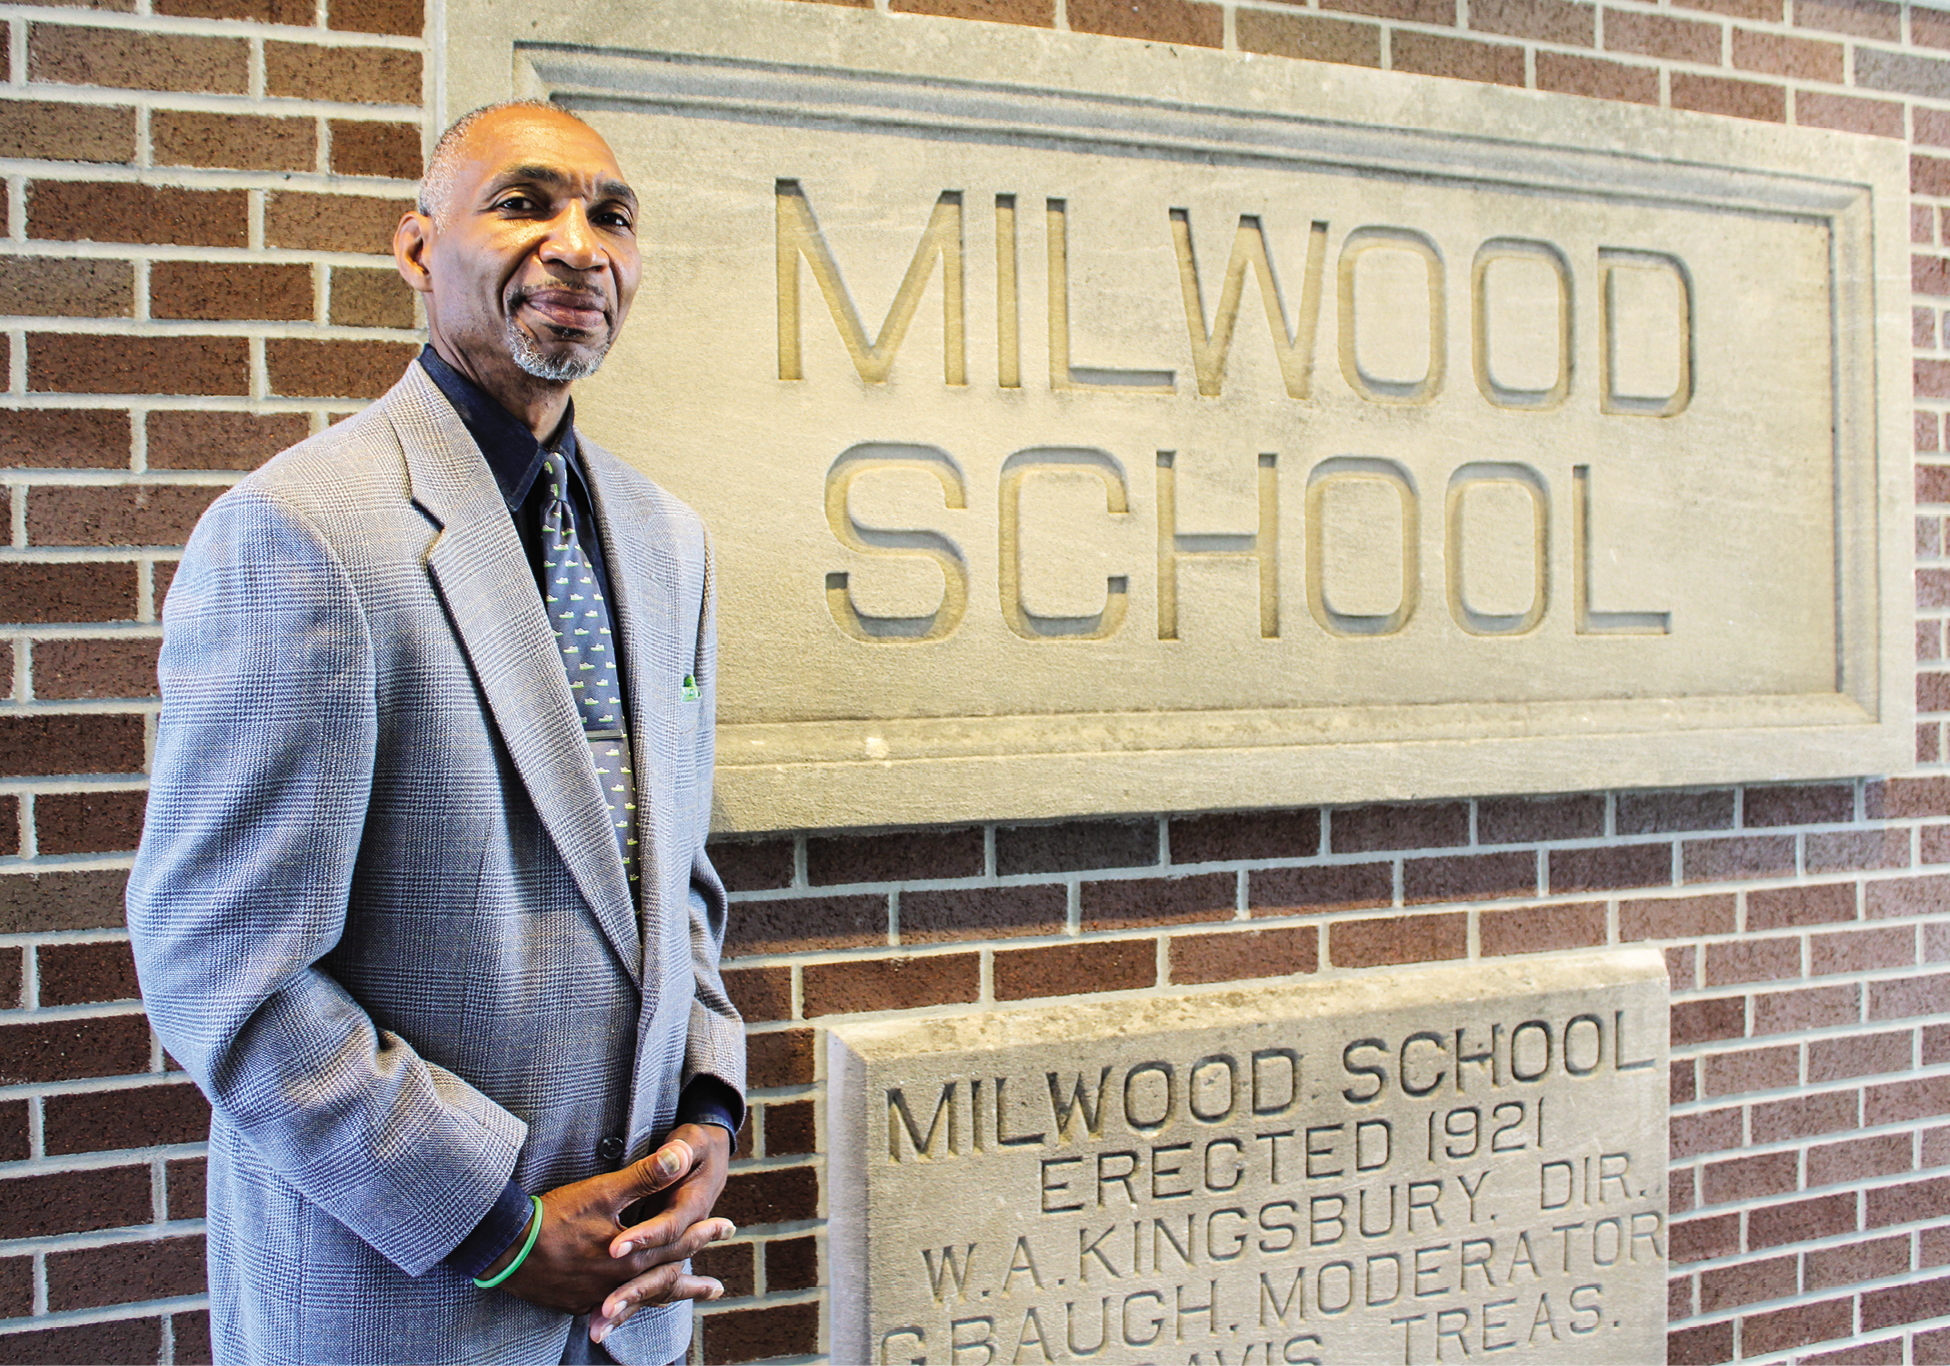 A bald Black man in a gray suit in front of a brick wall and sign that says Milwood School